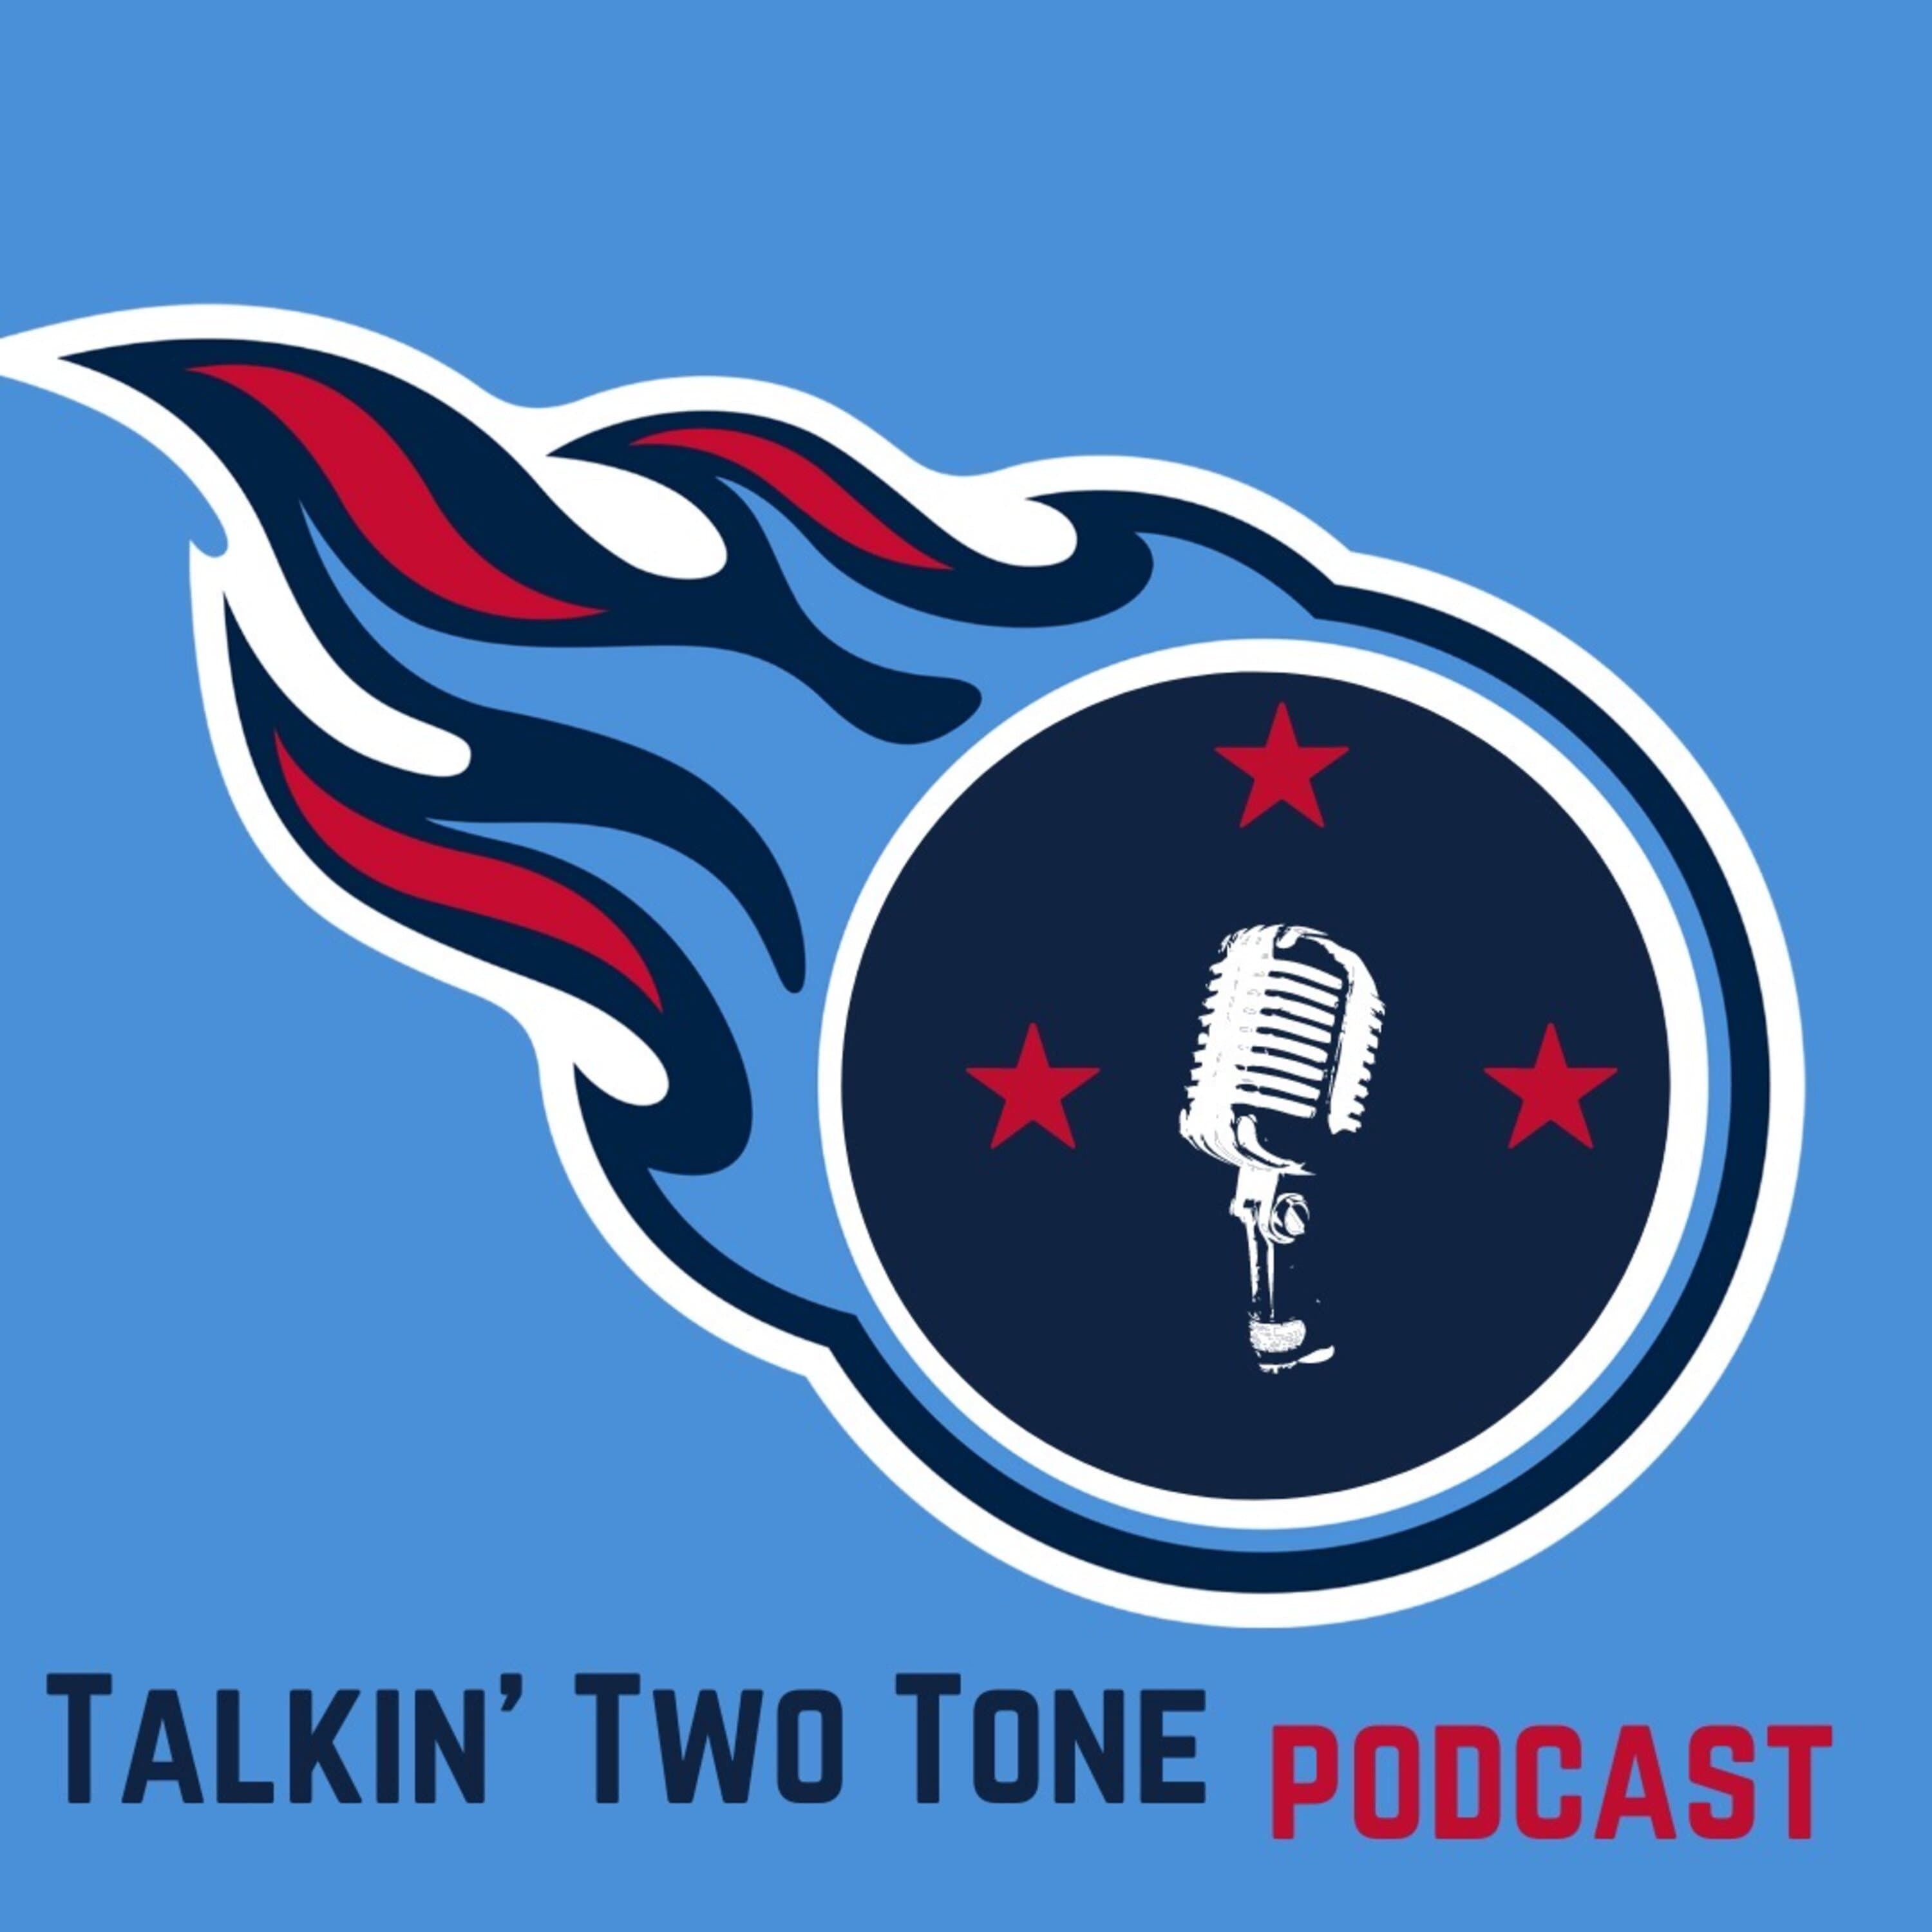 Artwork for podcast Talkin’ Two Tone (A Titans Podcast)